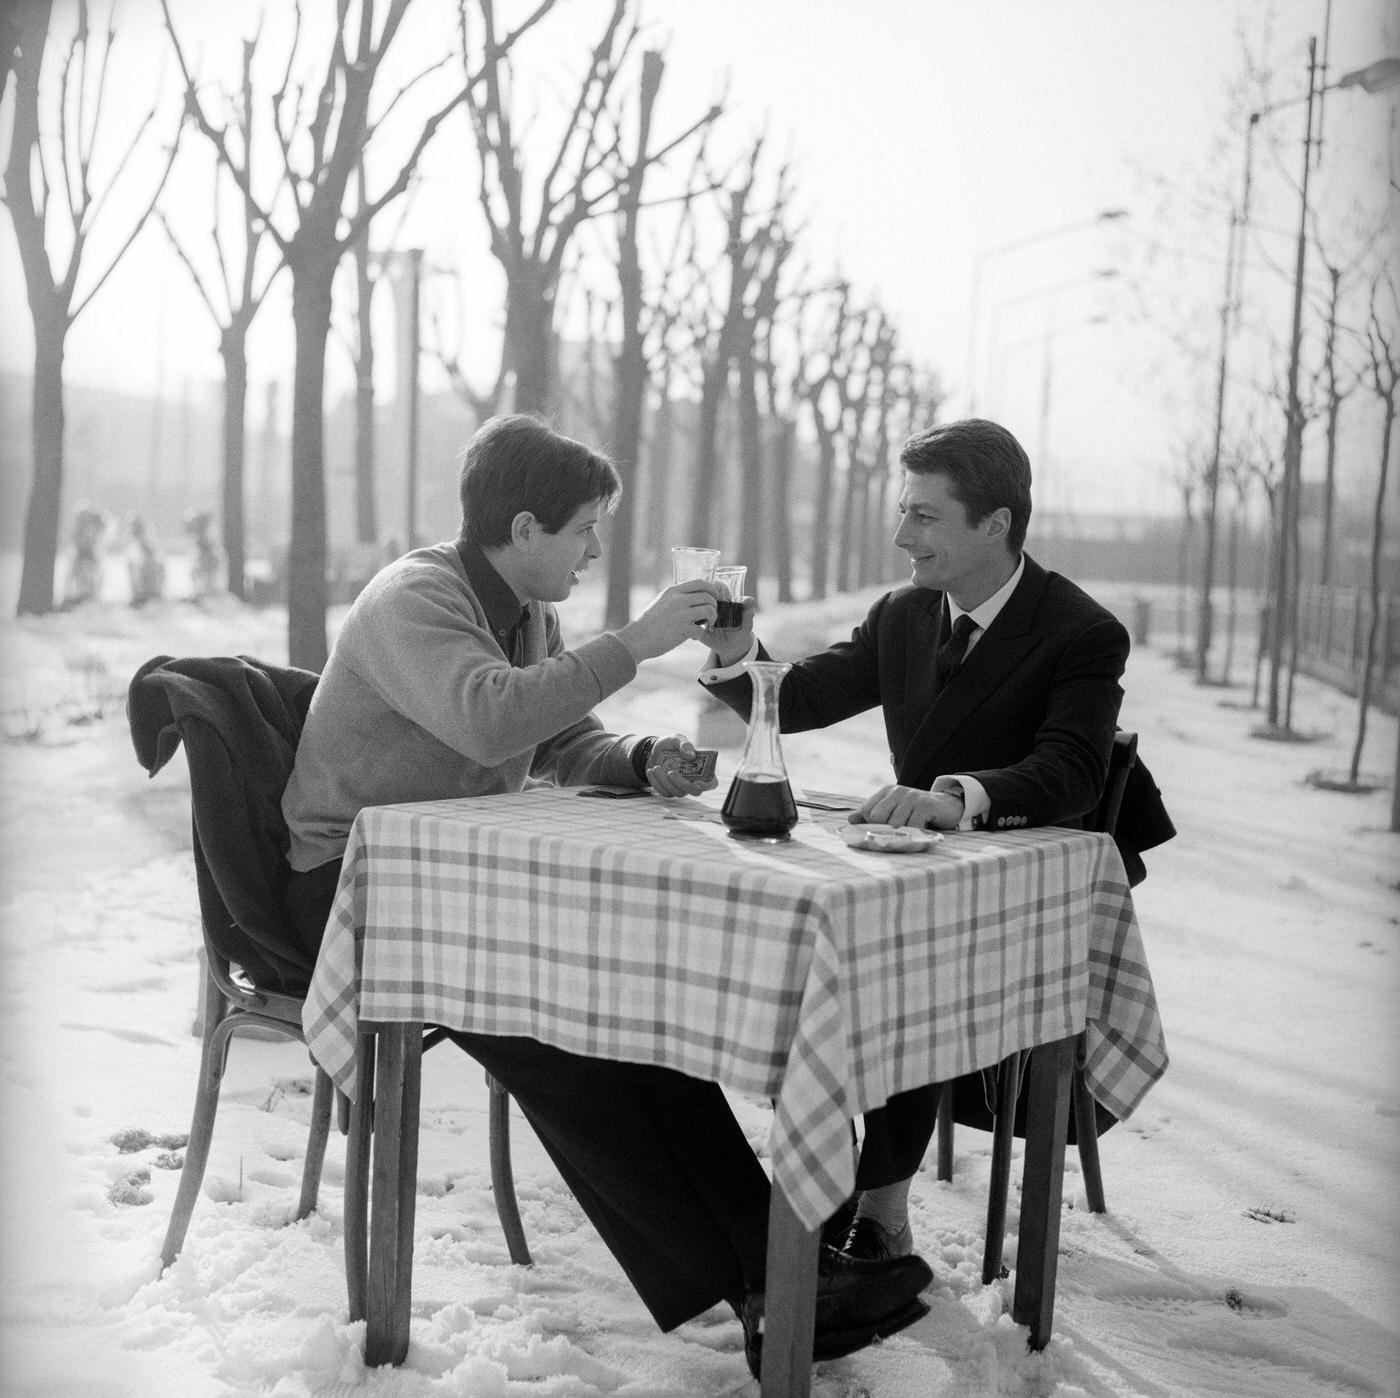 The Italian voice artist and film actor Corrado Pani and the US actor Joseph Walsh are chatting around a square table in the open air, in a snow covered landscape; they are toasting with red wine. Italy, 1963.